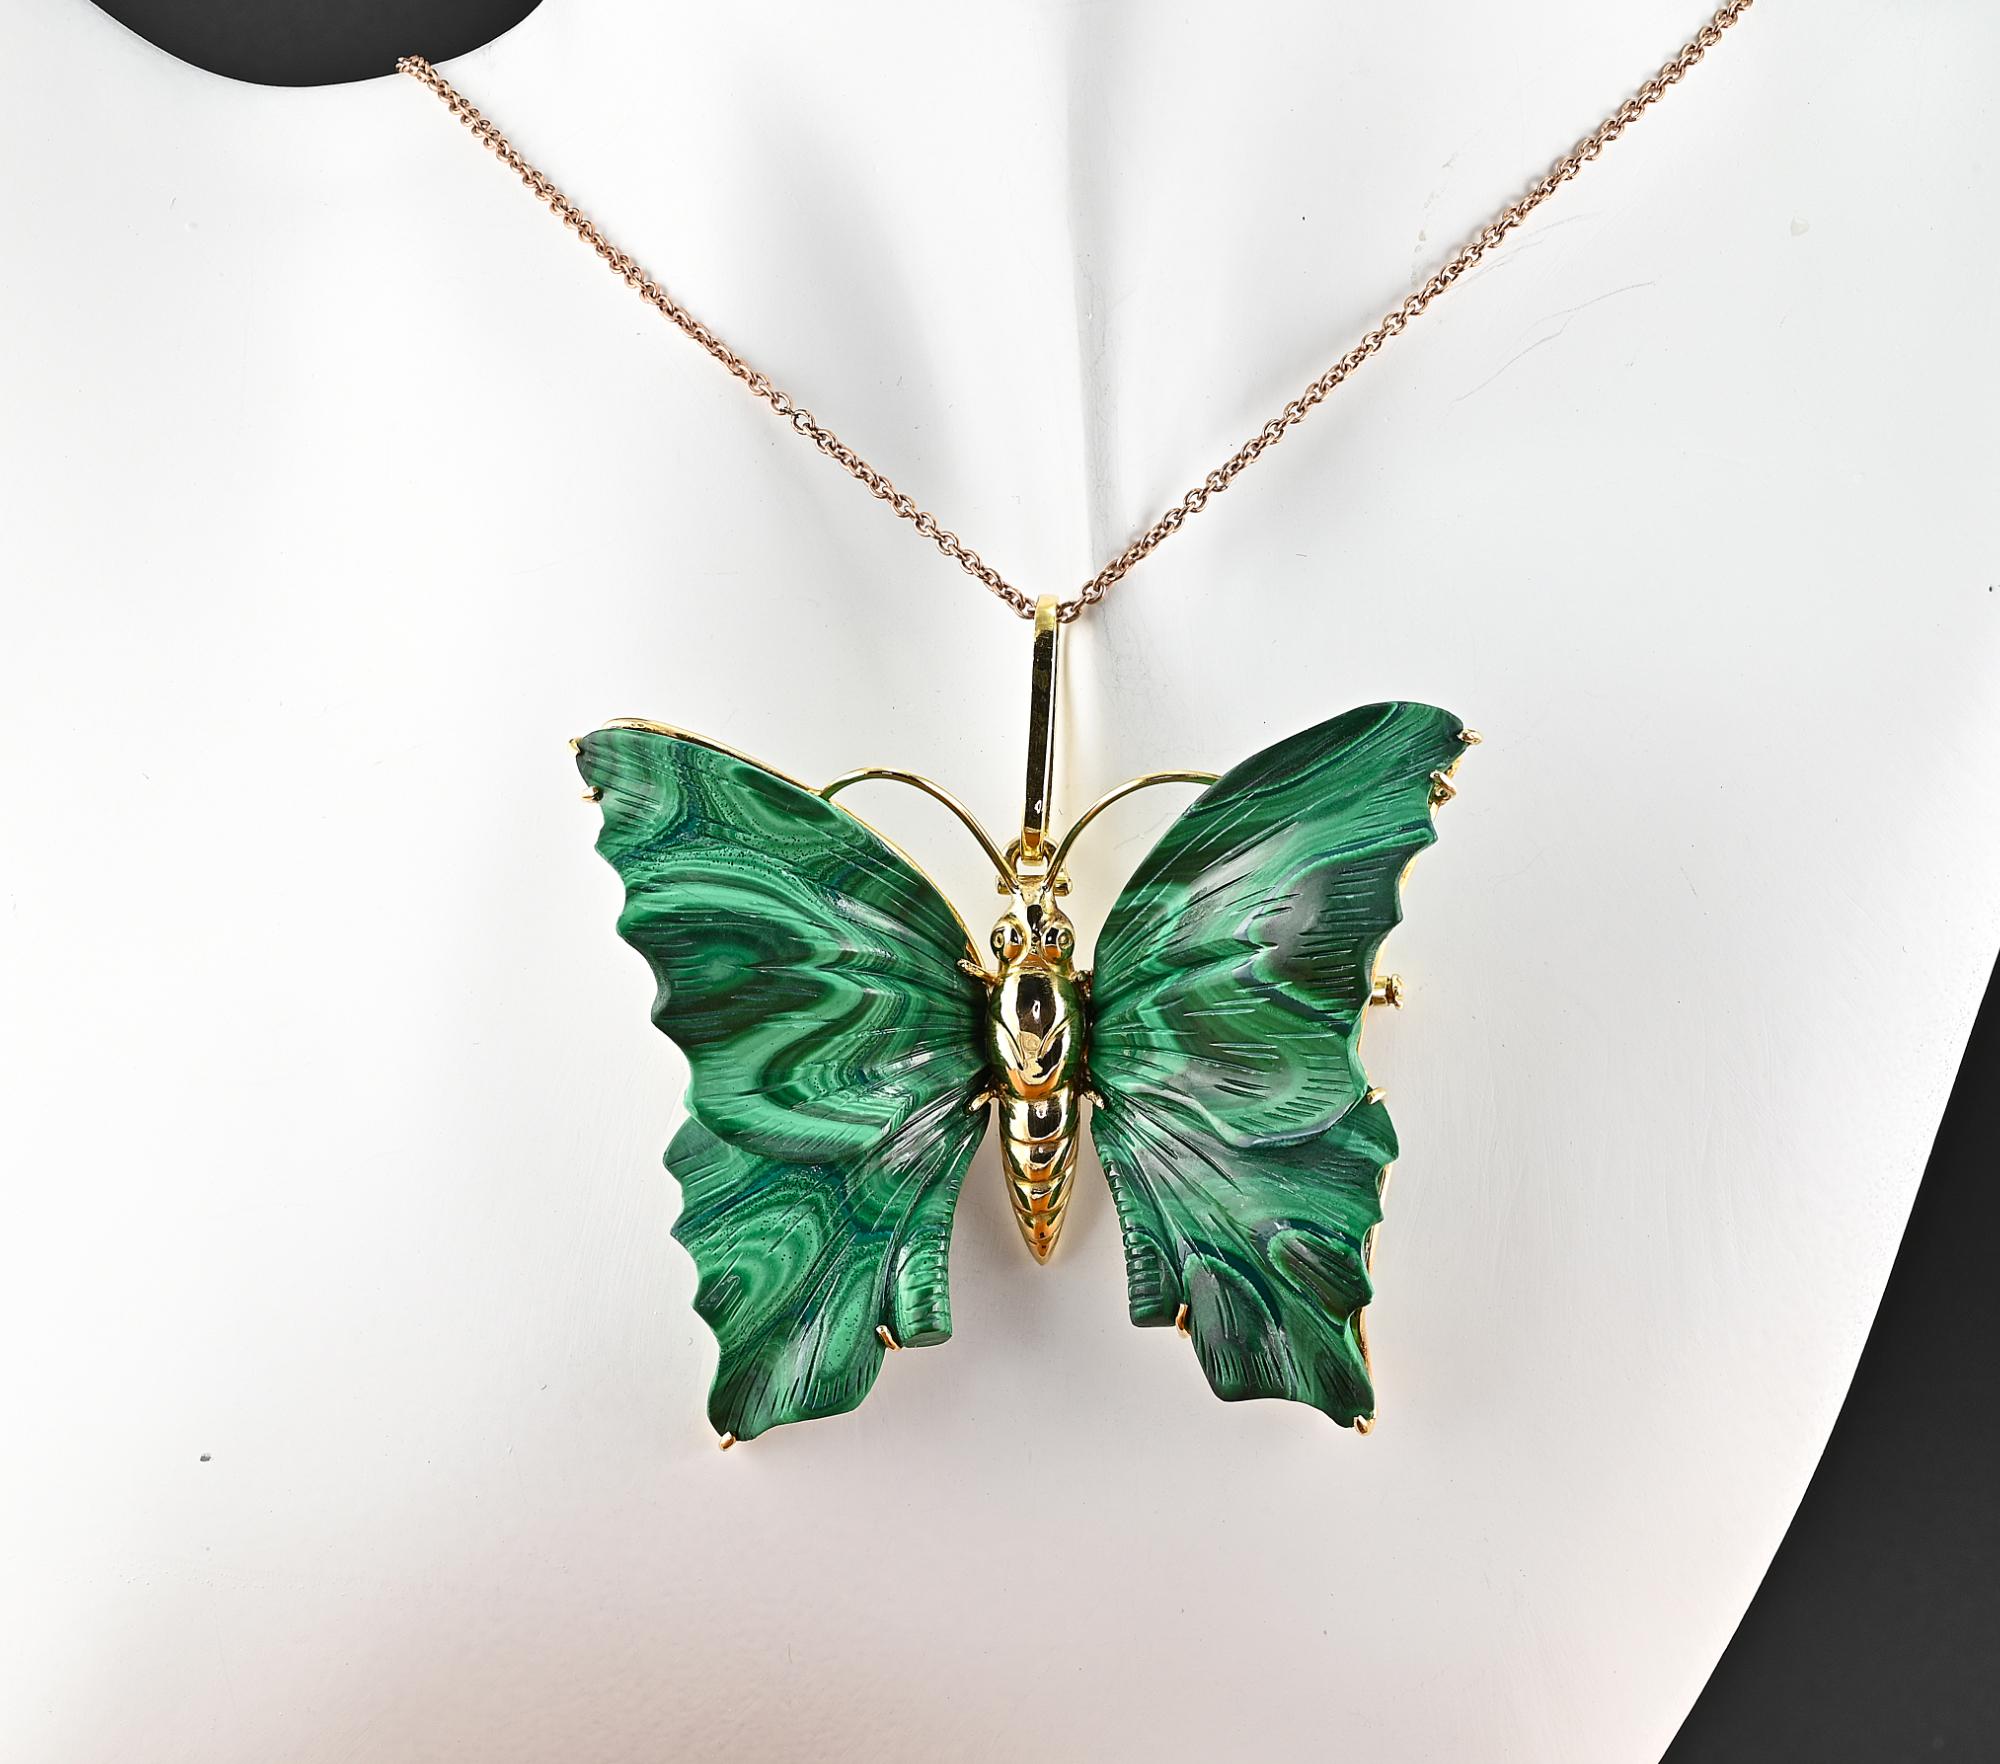 This breathtaking vintage brooch is 1970 ca
Skillfully rendered carving artwork mounted in 18 KT solid gold
Large wings made of natural Malachite with amazing pattern
Can be worn as brooch or pendant
Perfect condition
Glamorous brooch
Chain not